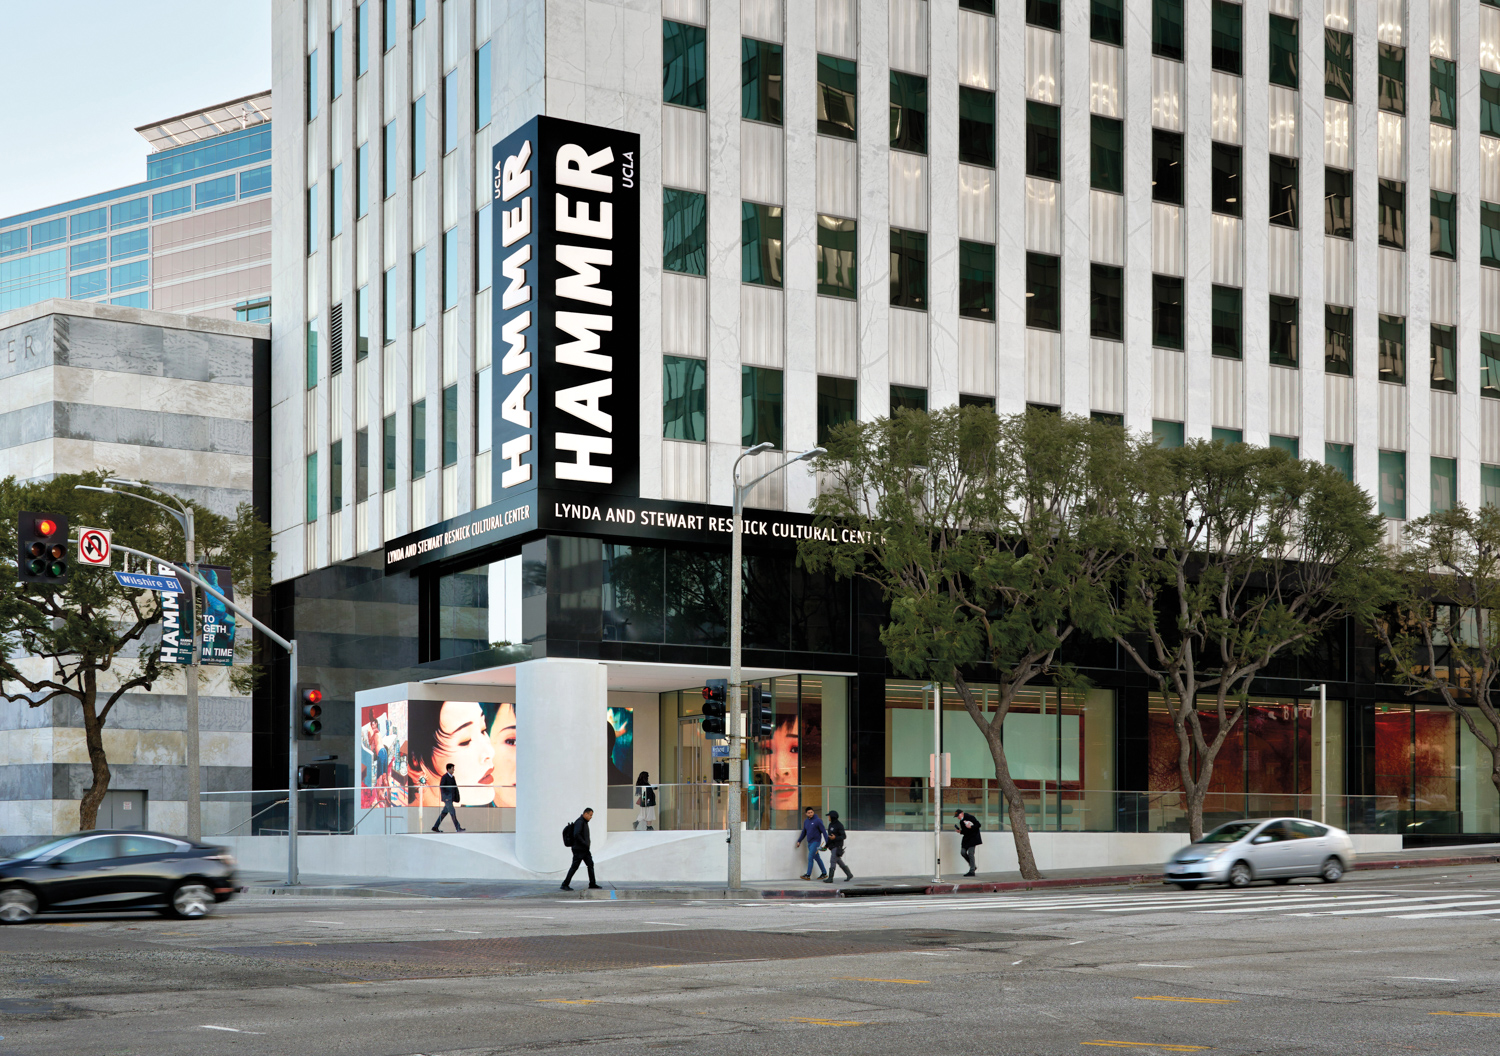 The renovated facade of the Hammer Museum at the corner of two boulevards